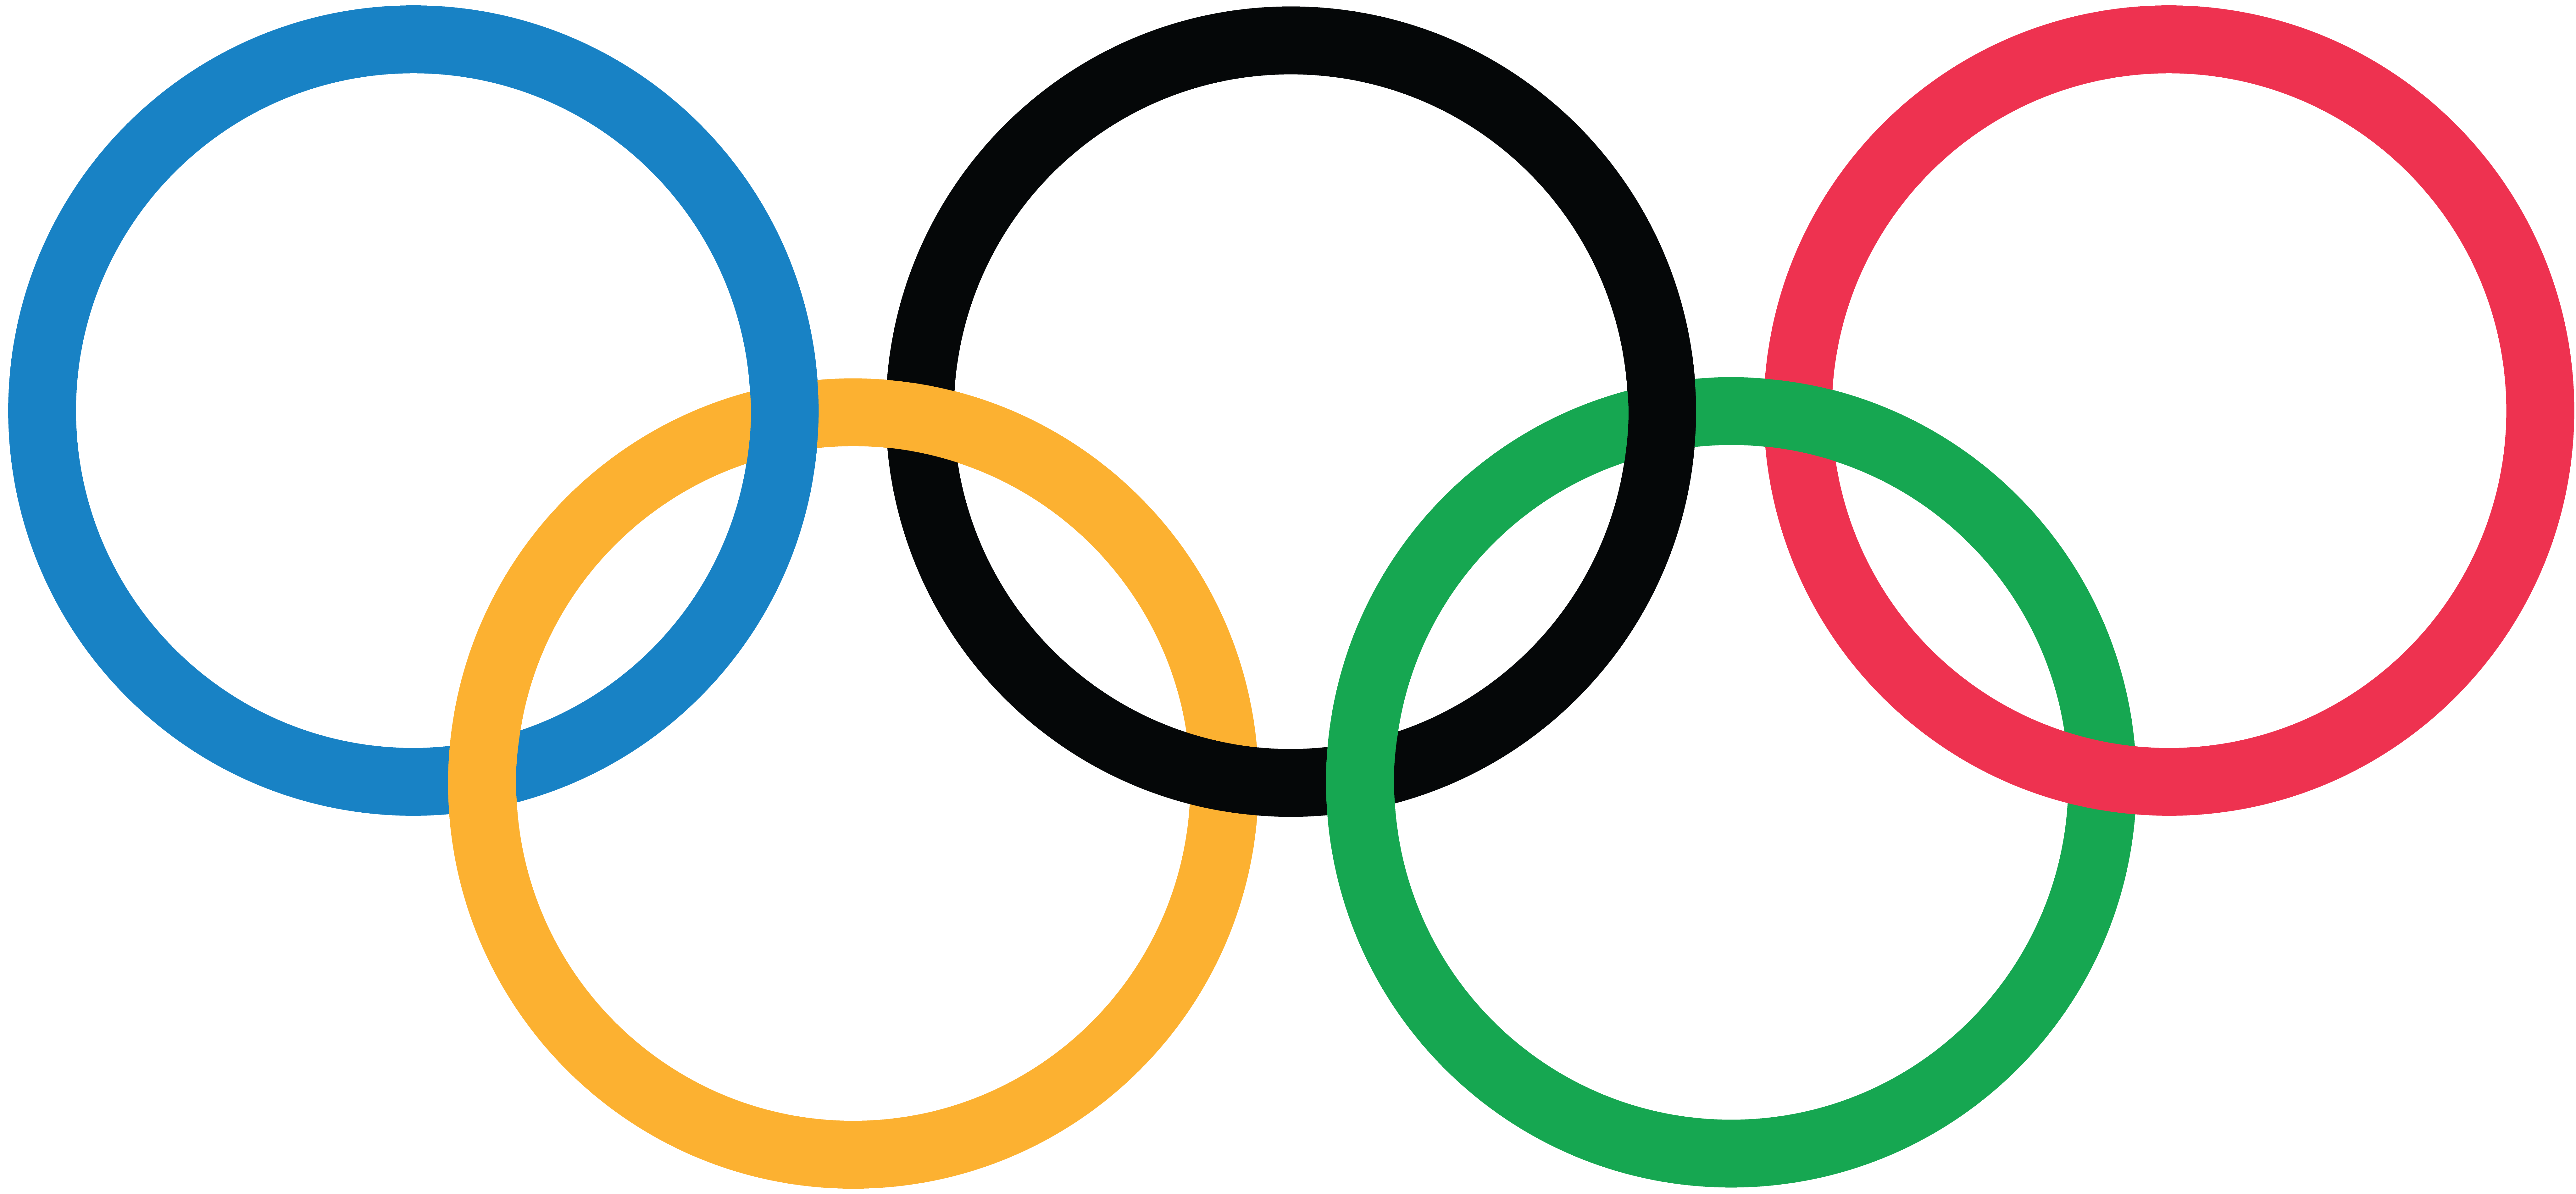 Olympic clipart olympics sport. Games rings official png